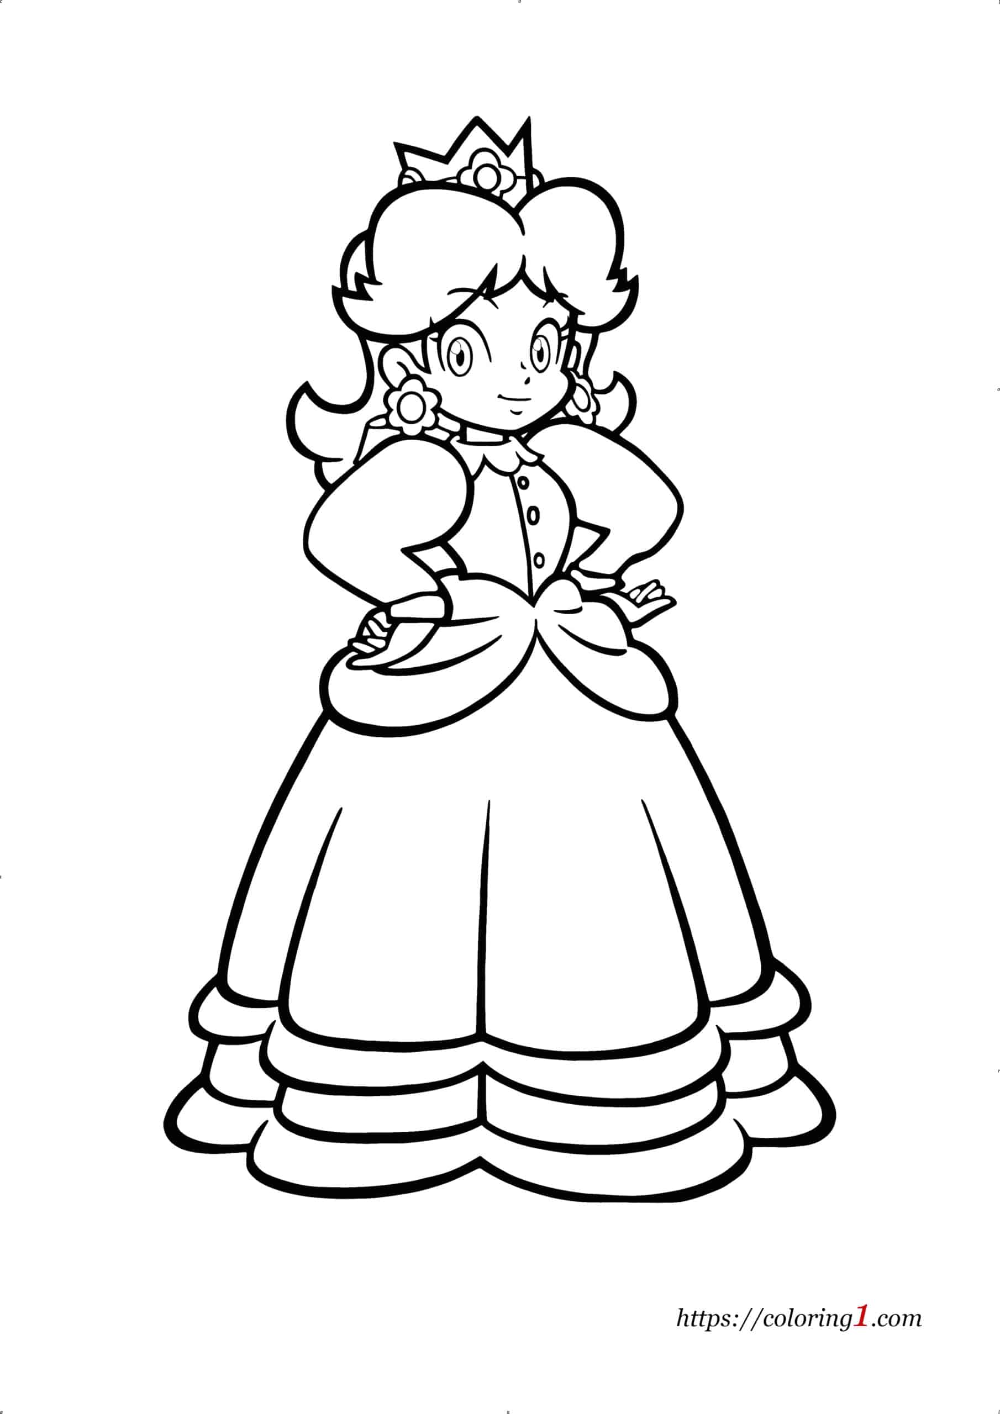 Princess Peach Coloring Pages for Kids 71